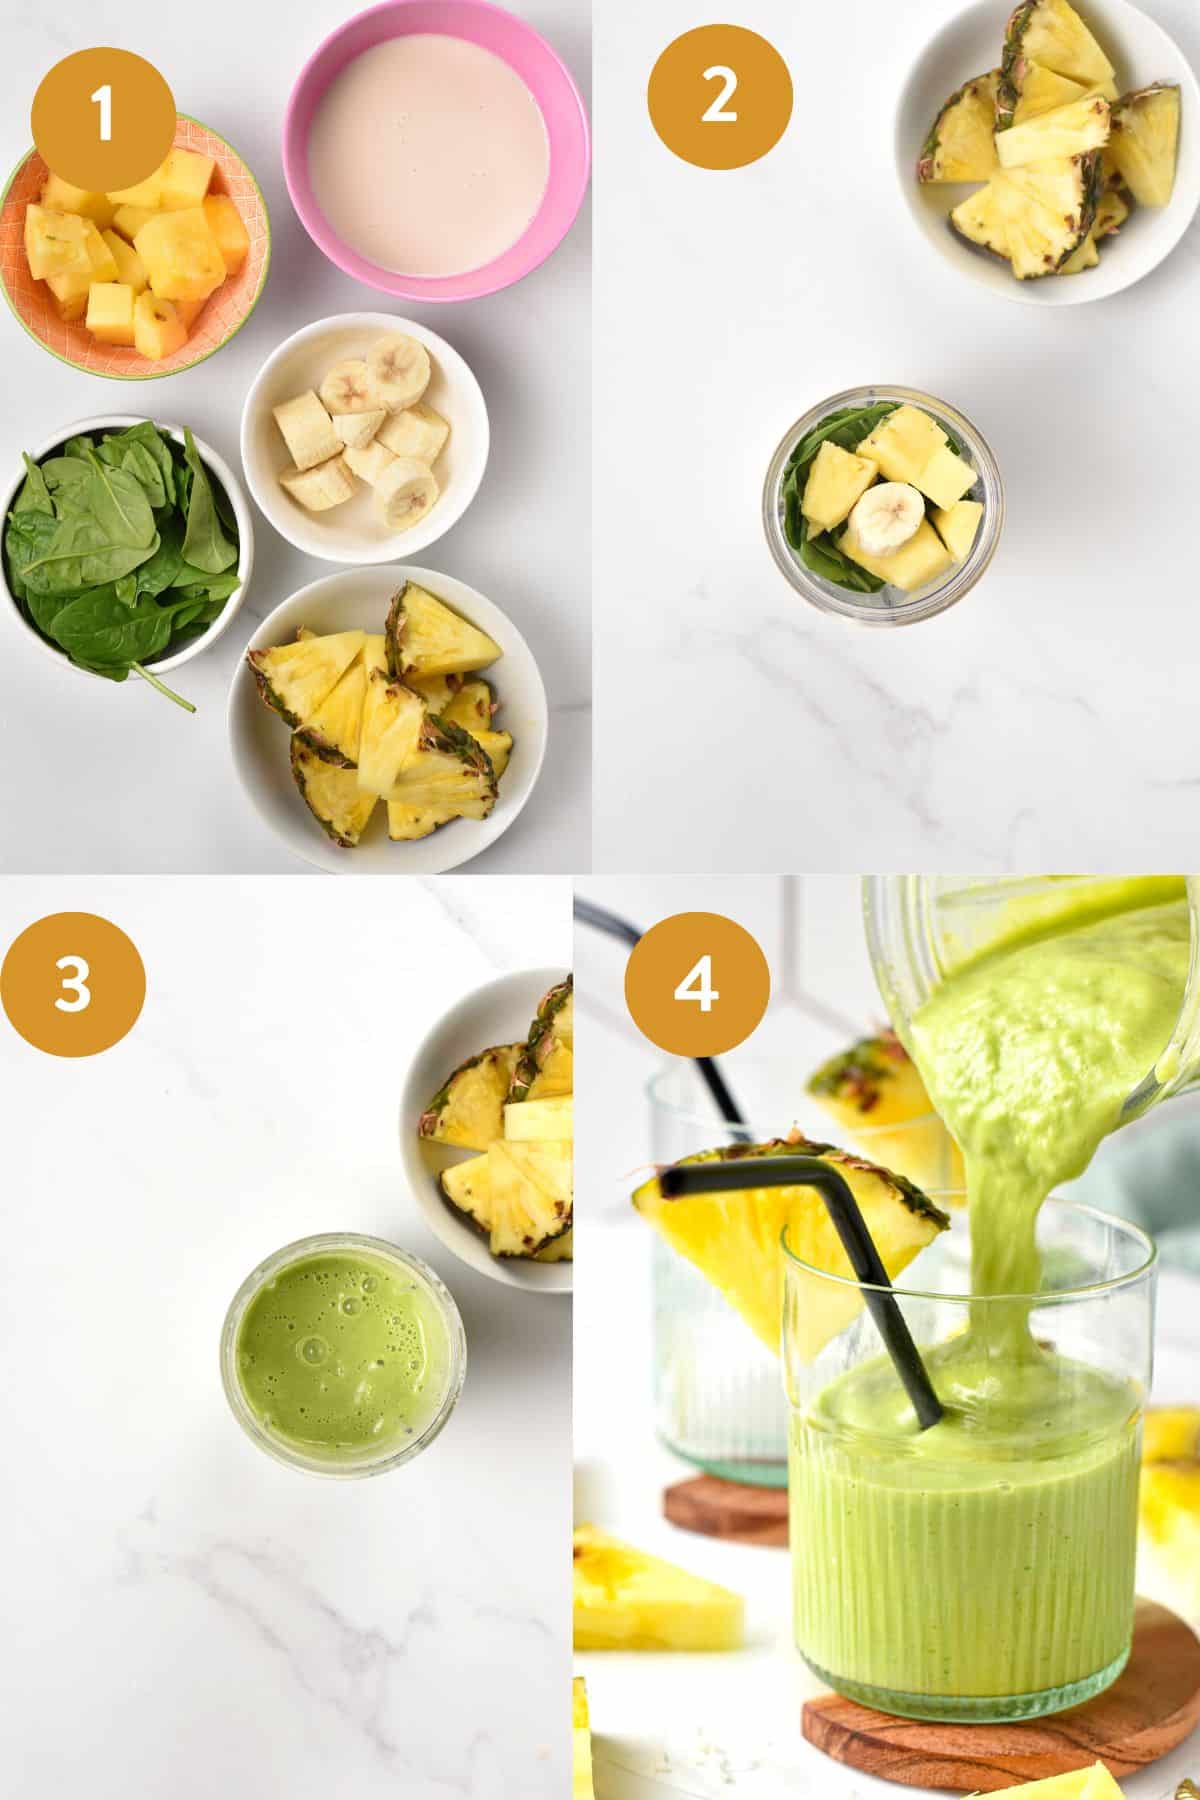 This Spinach Pineapple Banana Smoothie is a delicious easy green smoothie packed with tropical flavors and nutrients from spinach.